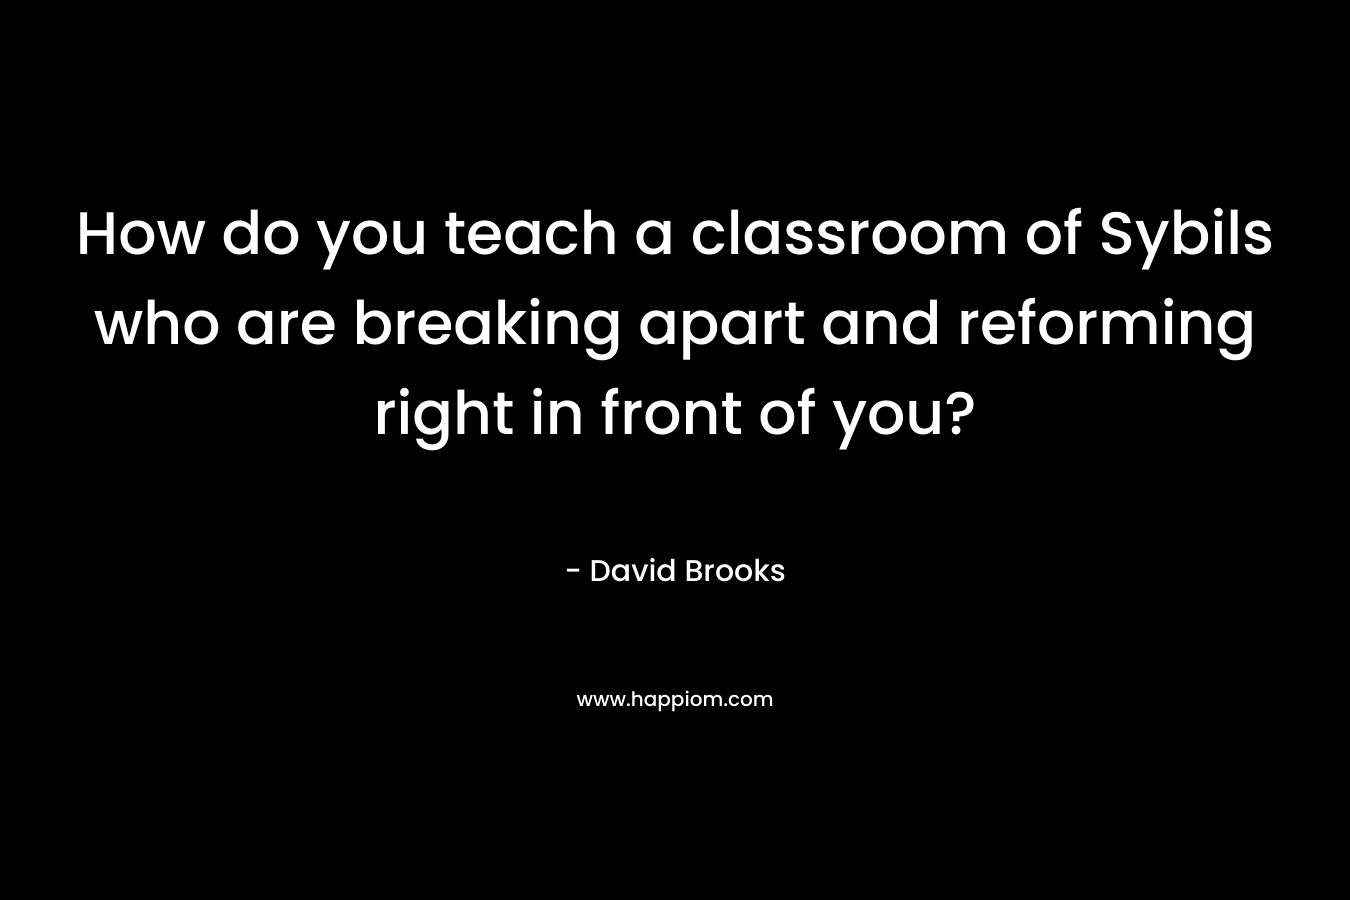 How do you teach a classroom of Sybils who are breaking apart and reforming right in front of you? – David Brooks